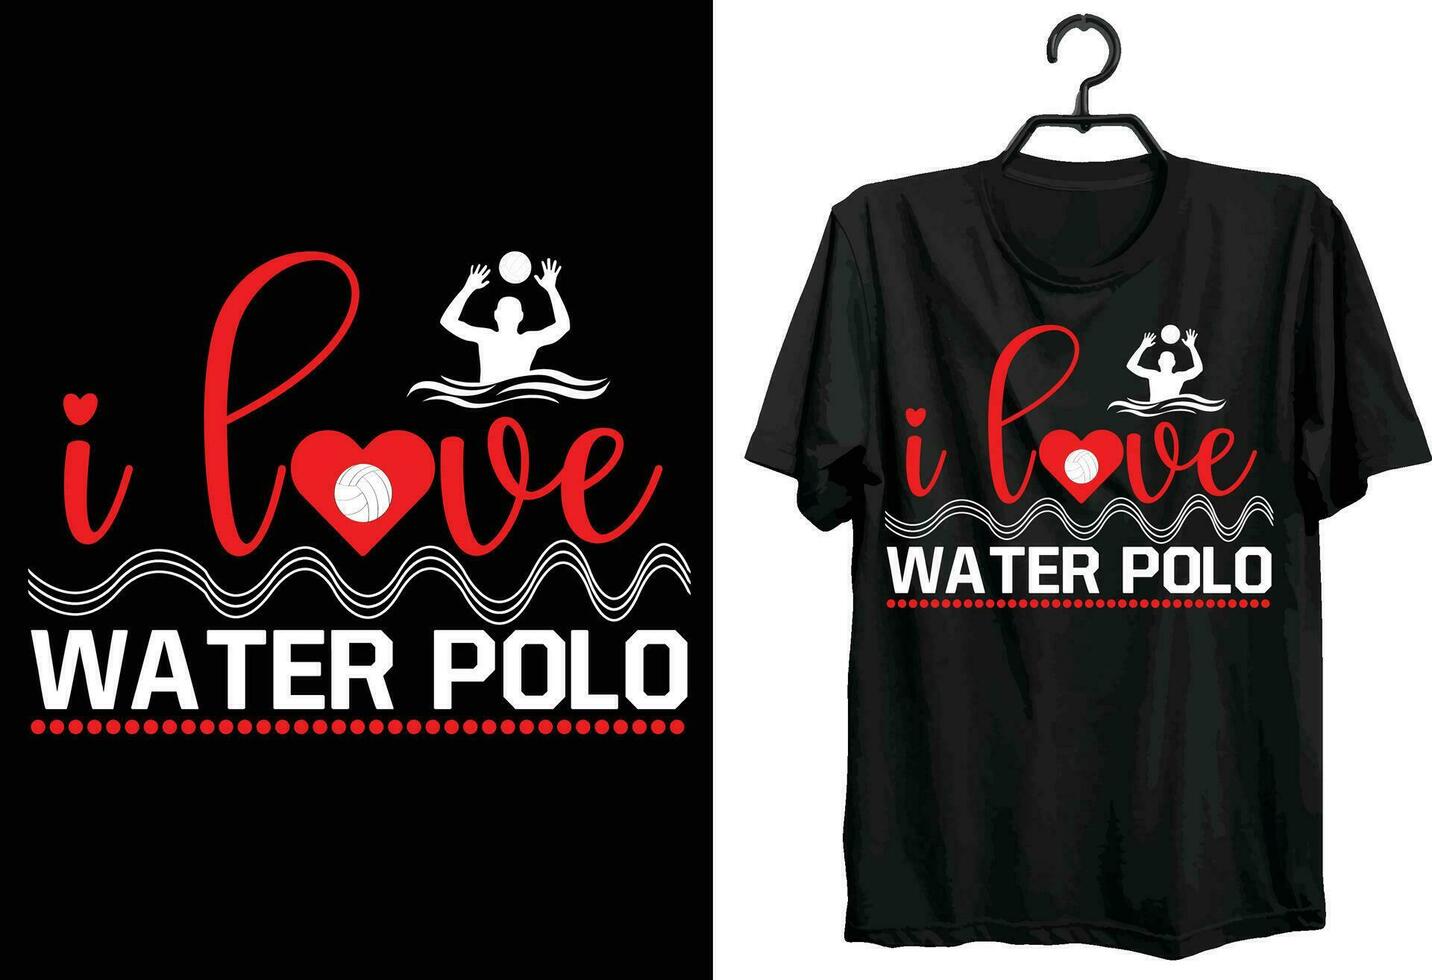 I Love Water Polo. Water Polo T-shirt Design. Funny Gift Item Water Polo T-shirt Design For Water Polo Players. vector